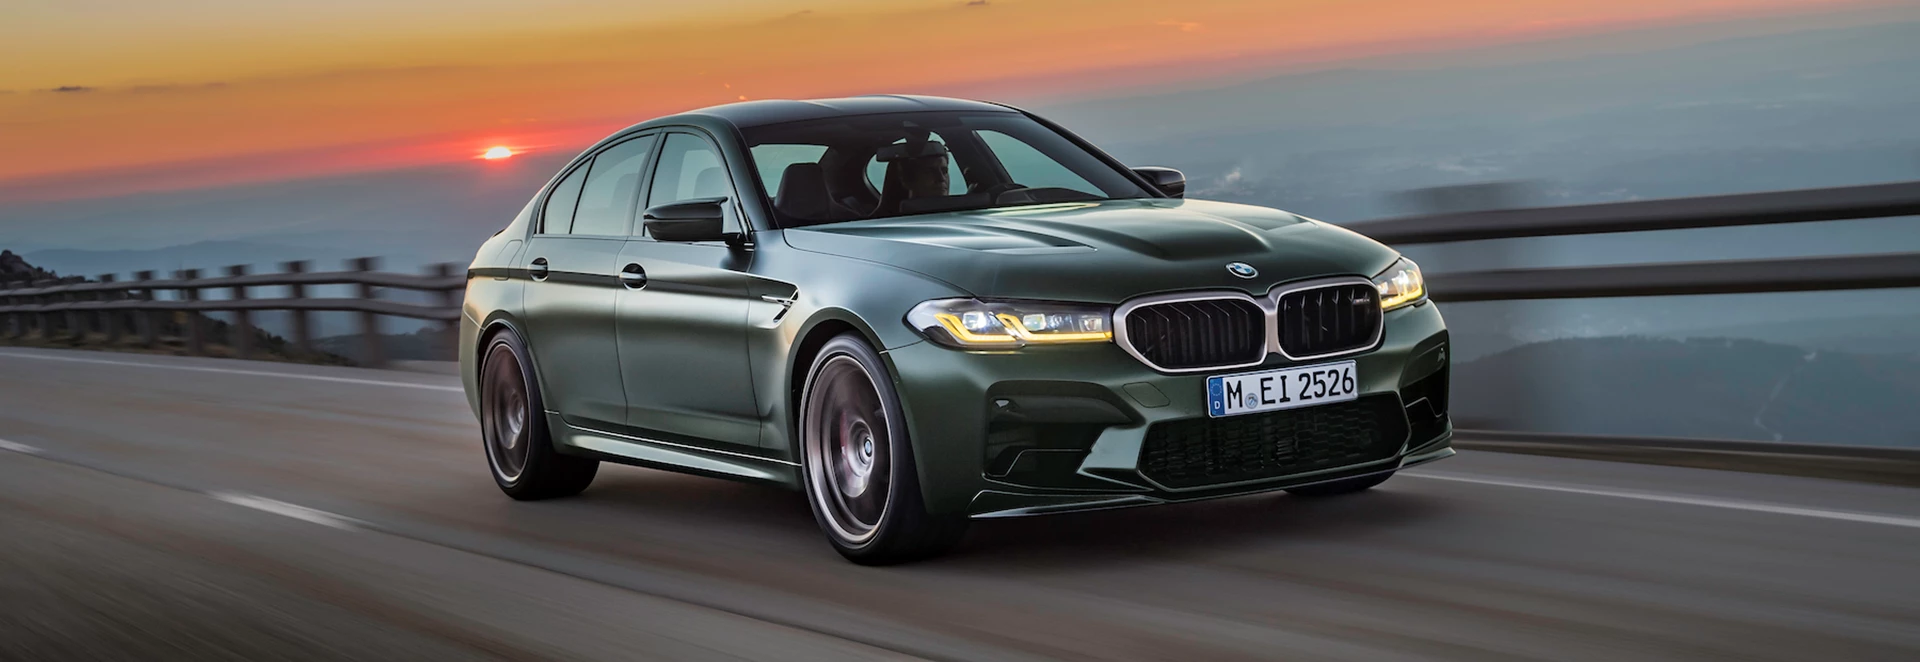 5 things you need to know about the new BMW M5 CS 